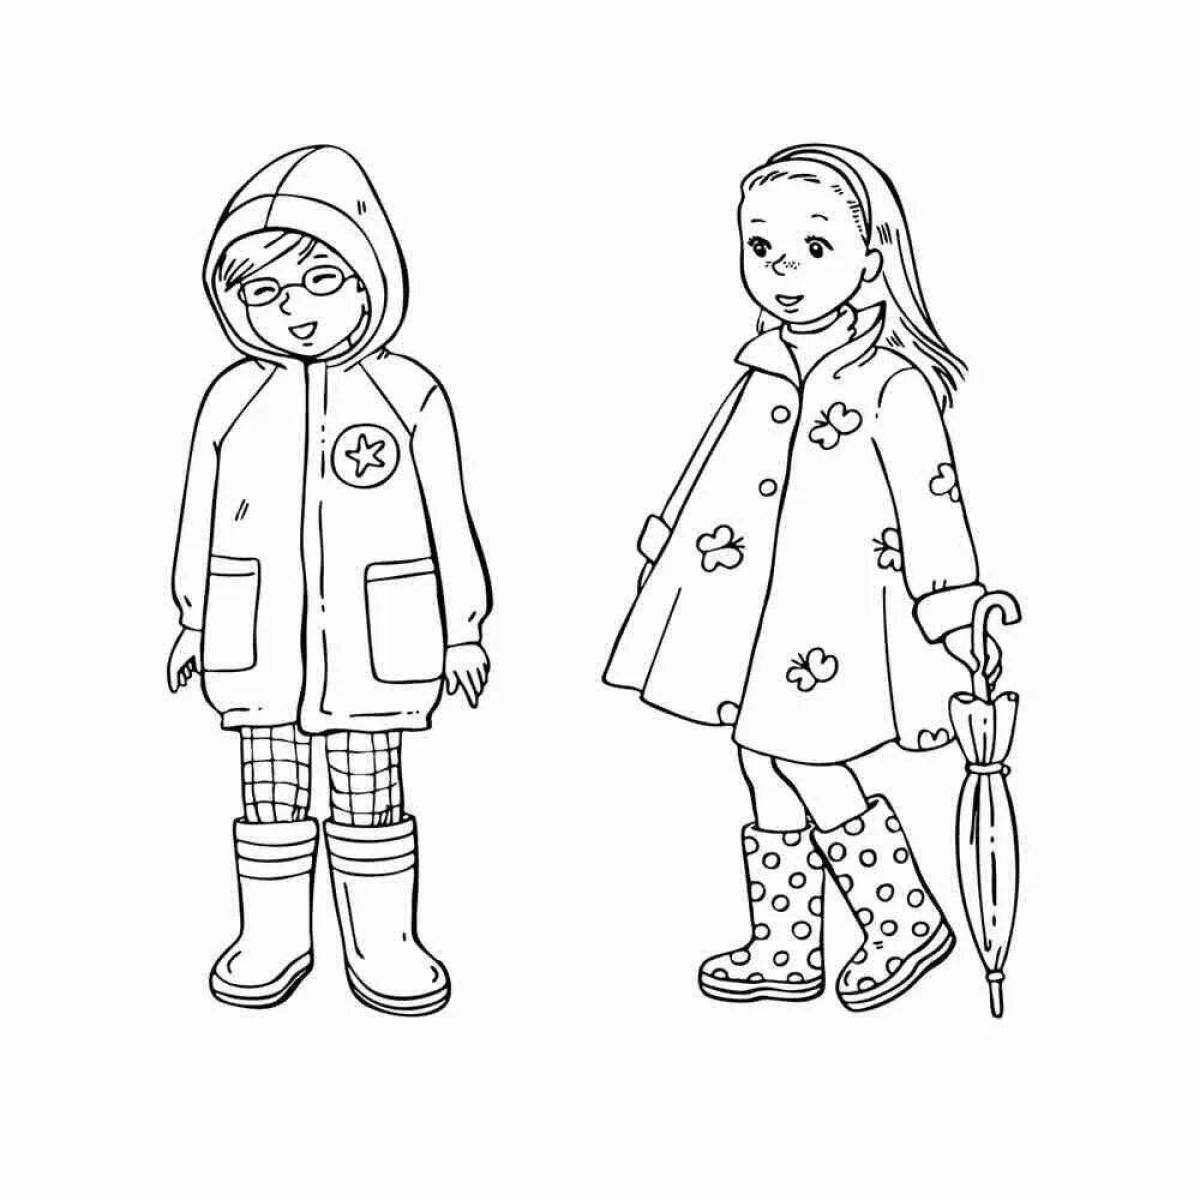 Fun clothes coloring page for kids